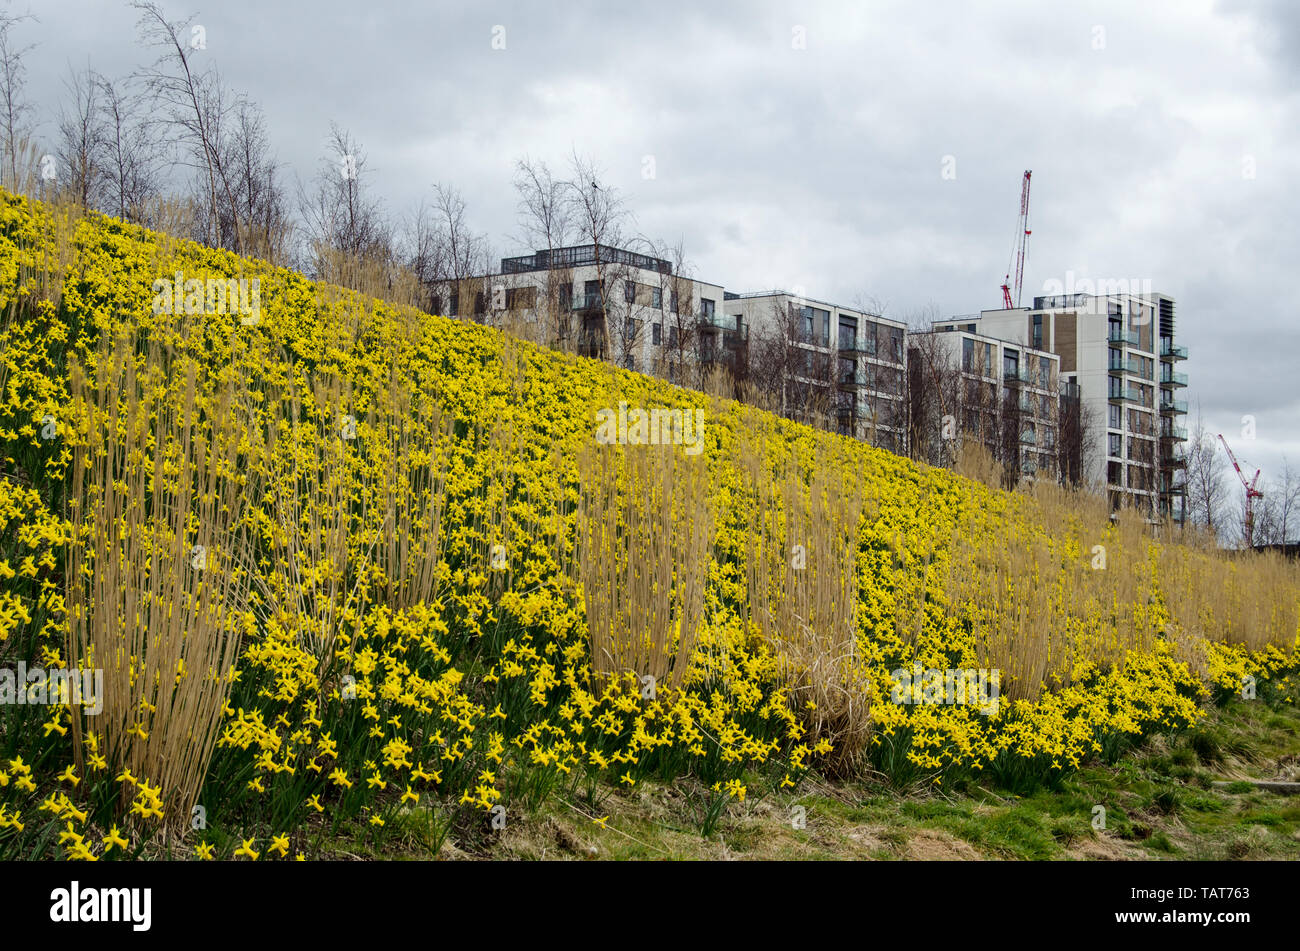 Hoards of yellow daffodils blooming in the new Queen Elizabeth Olympic Park constructed on the site of the former London Olympic Games in Stratford, L Stock Photo